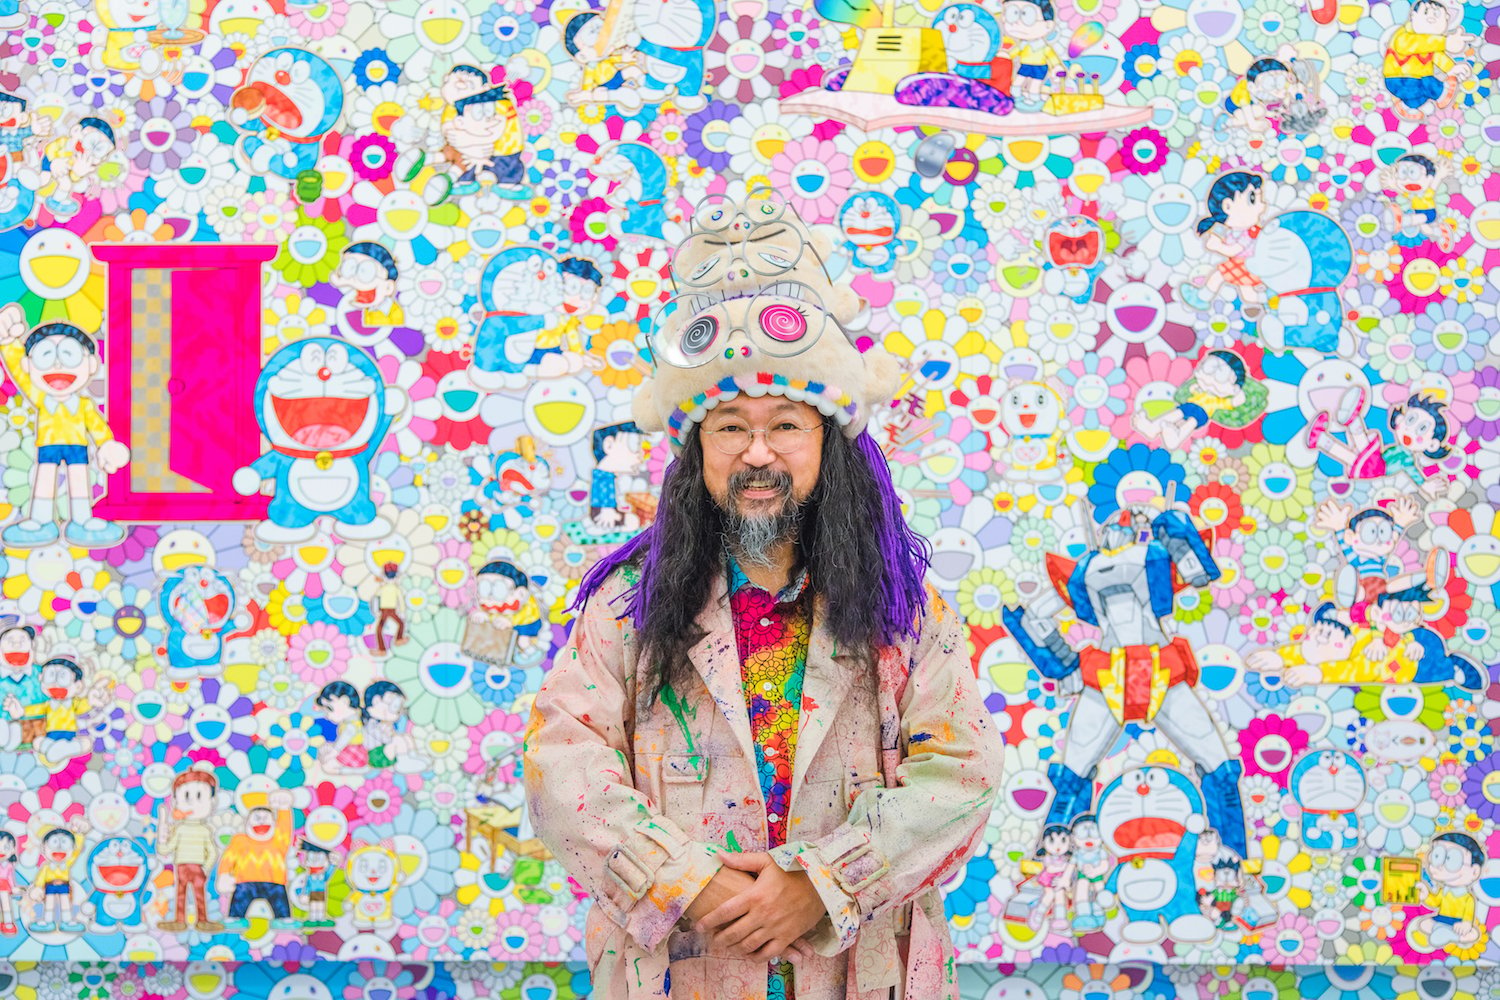 Superstar Artist Takashi Murakami Just Split With Blum & Poe, His Longtime  Gallery That Made Him Famous. Why?